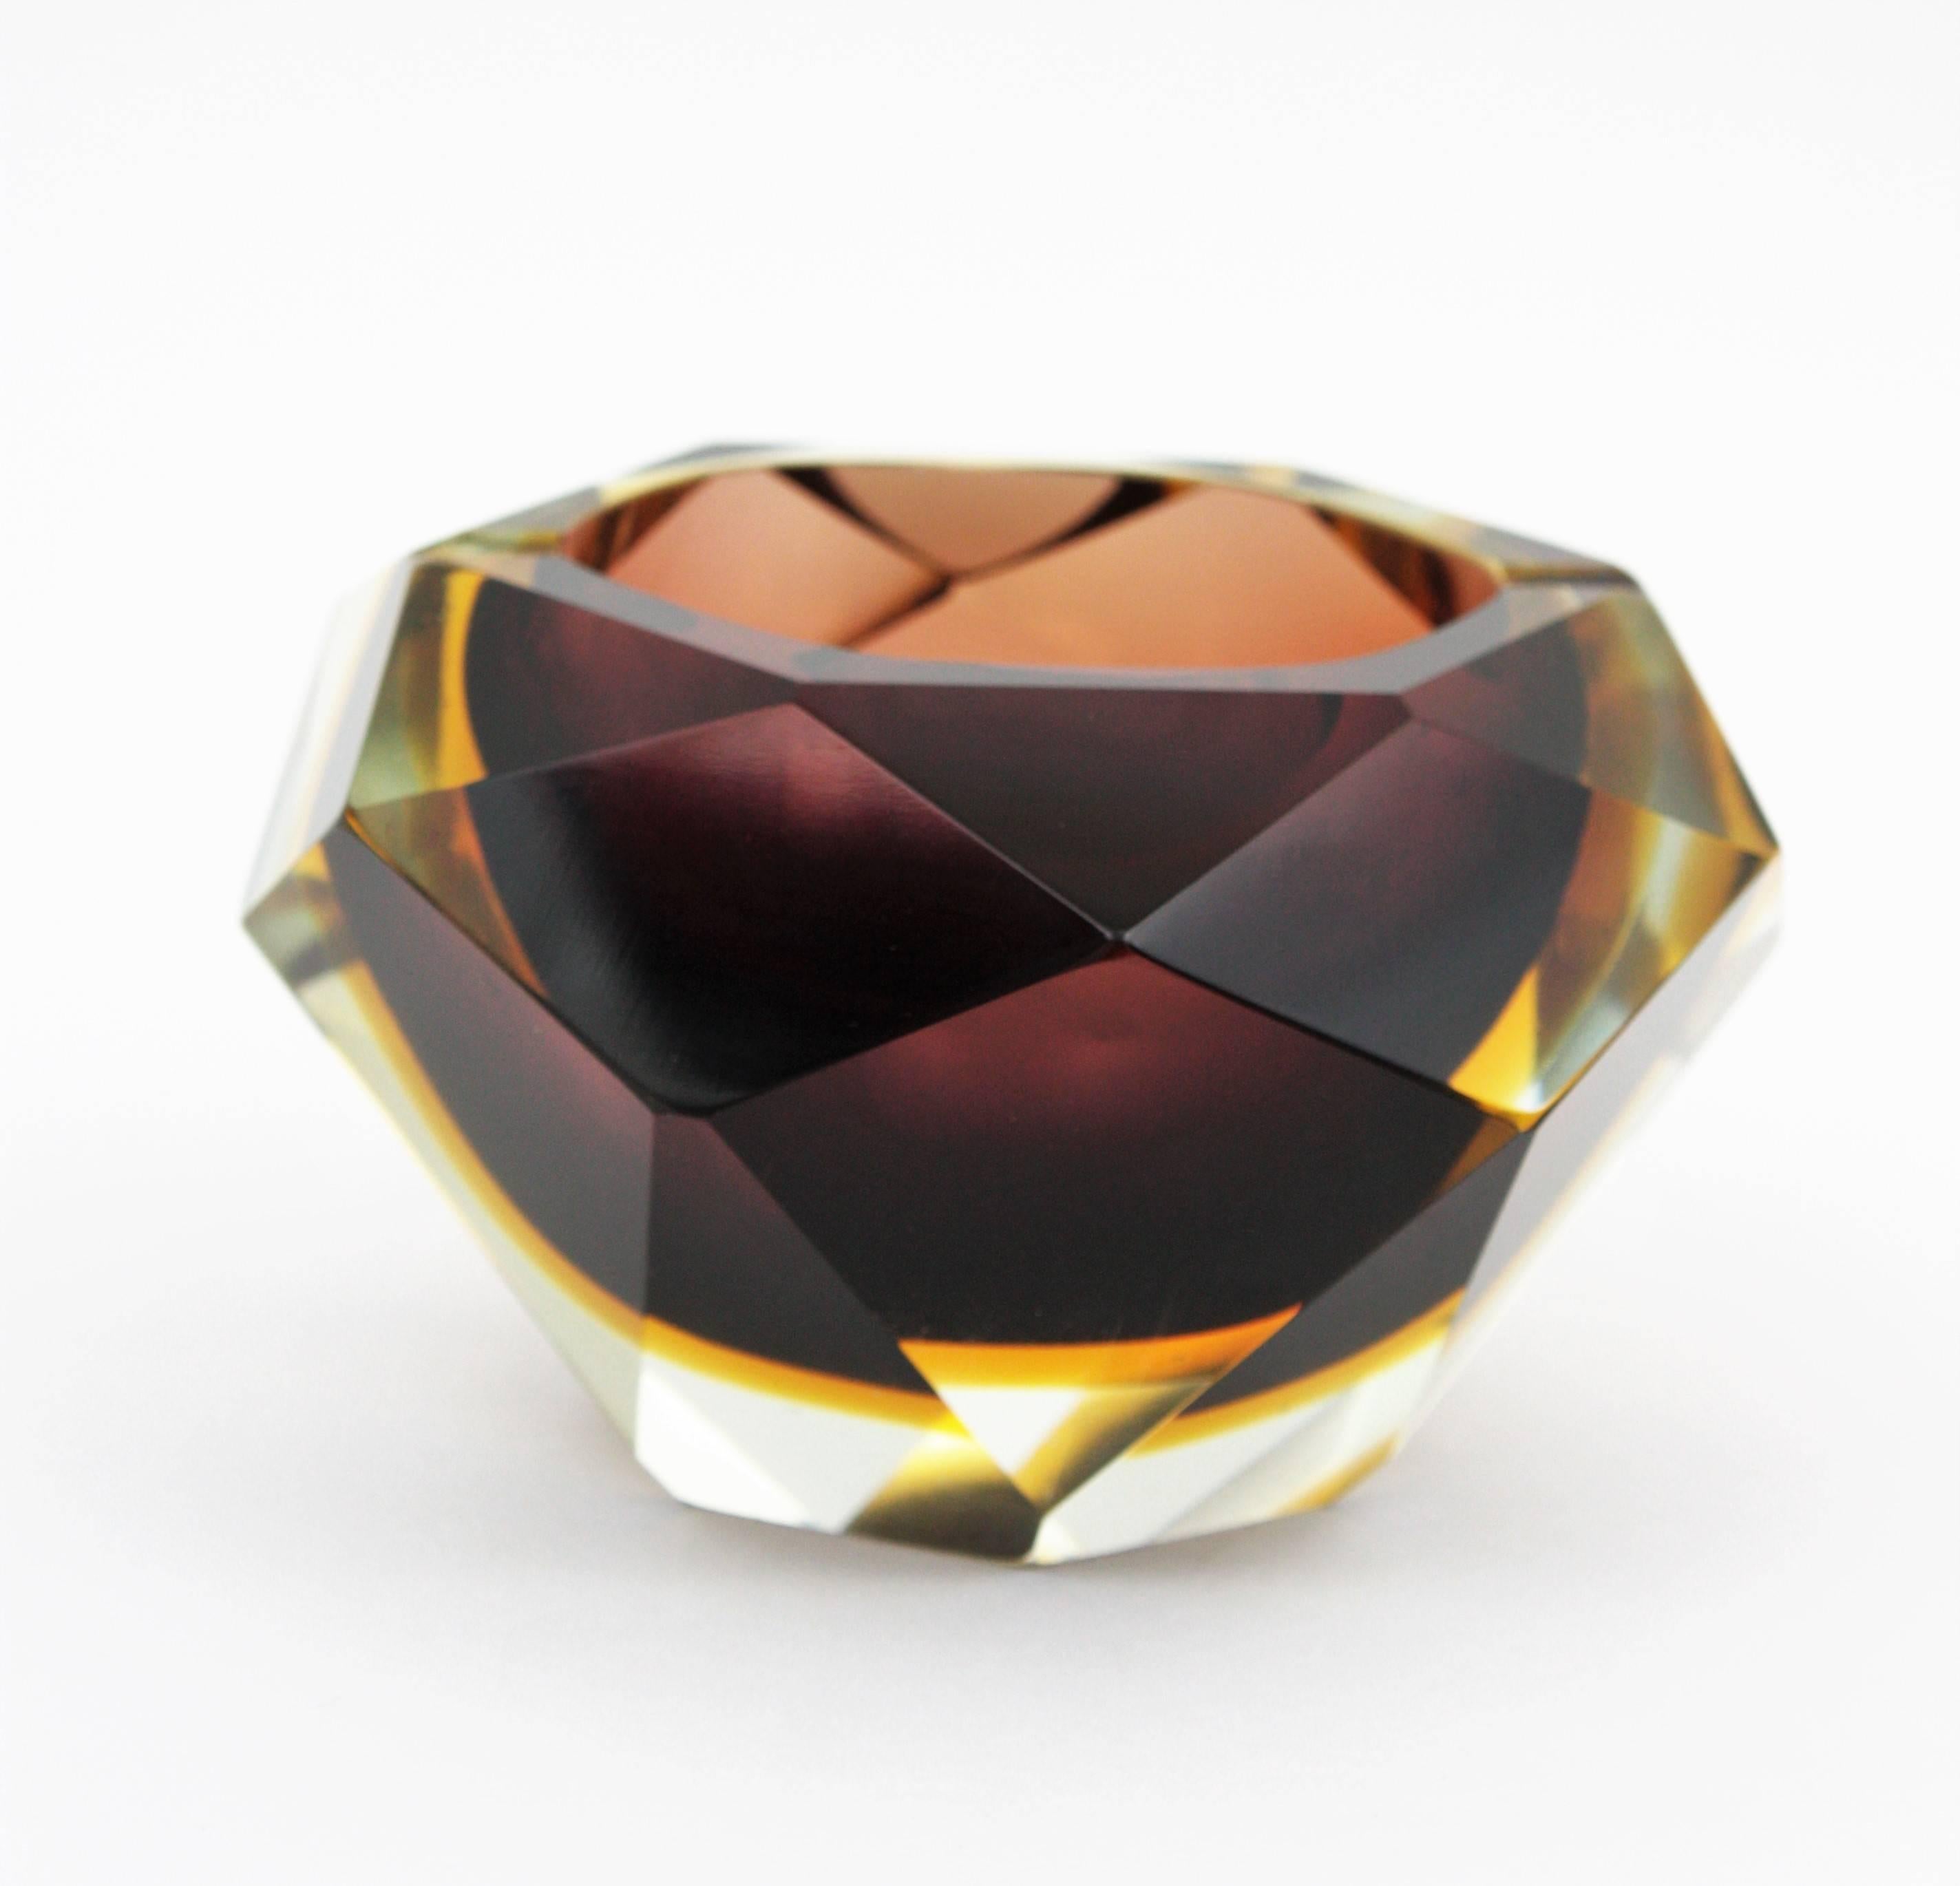 Mid-20th Century Italian Giant Madruzzato Brown & Yellow Faceted Sommerso Murano Glass Ashtray